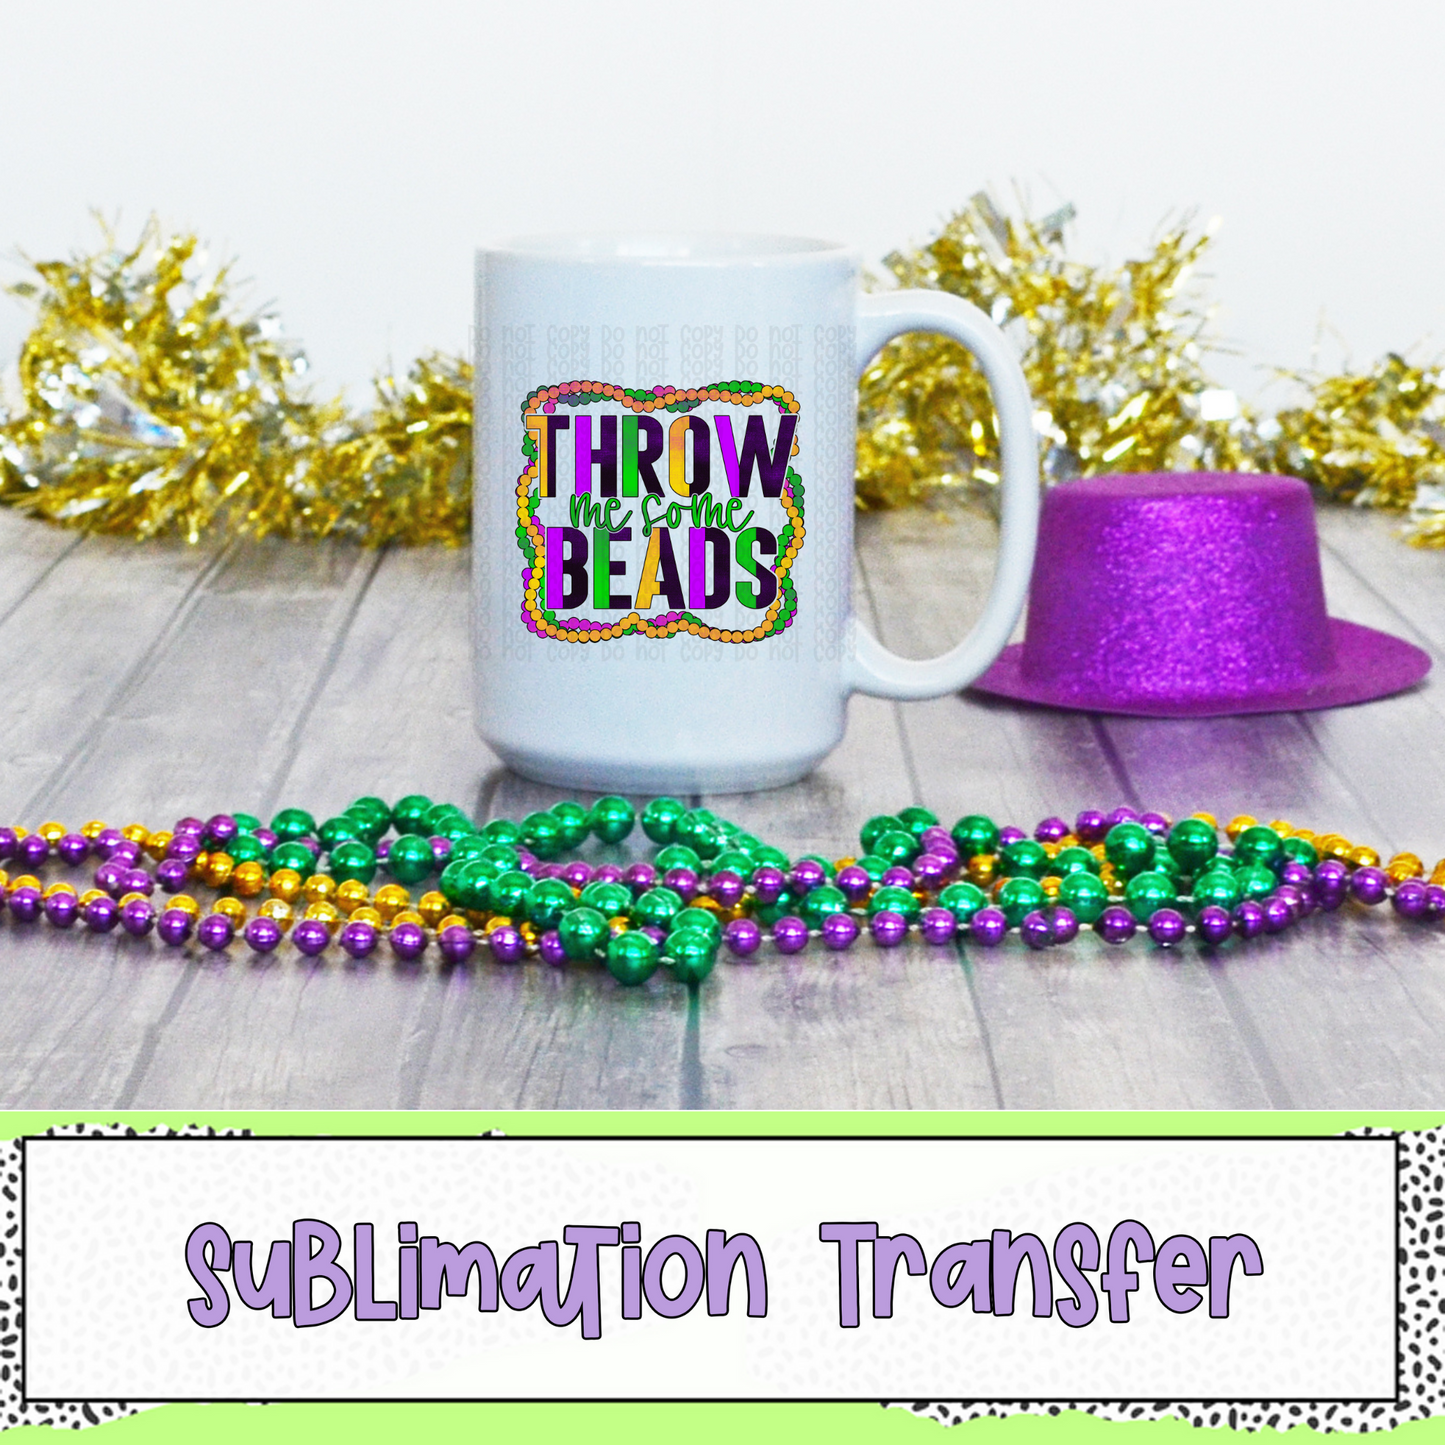 Throw Me Some Beads - SUBLIMATION TRANSFER